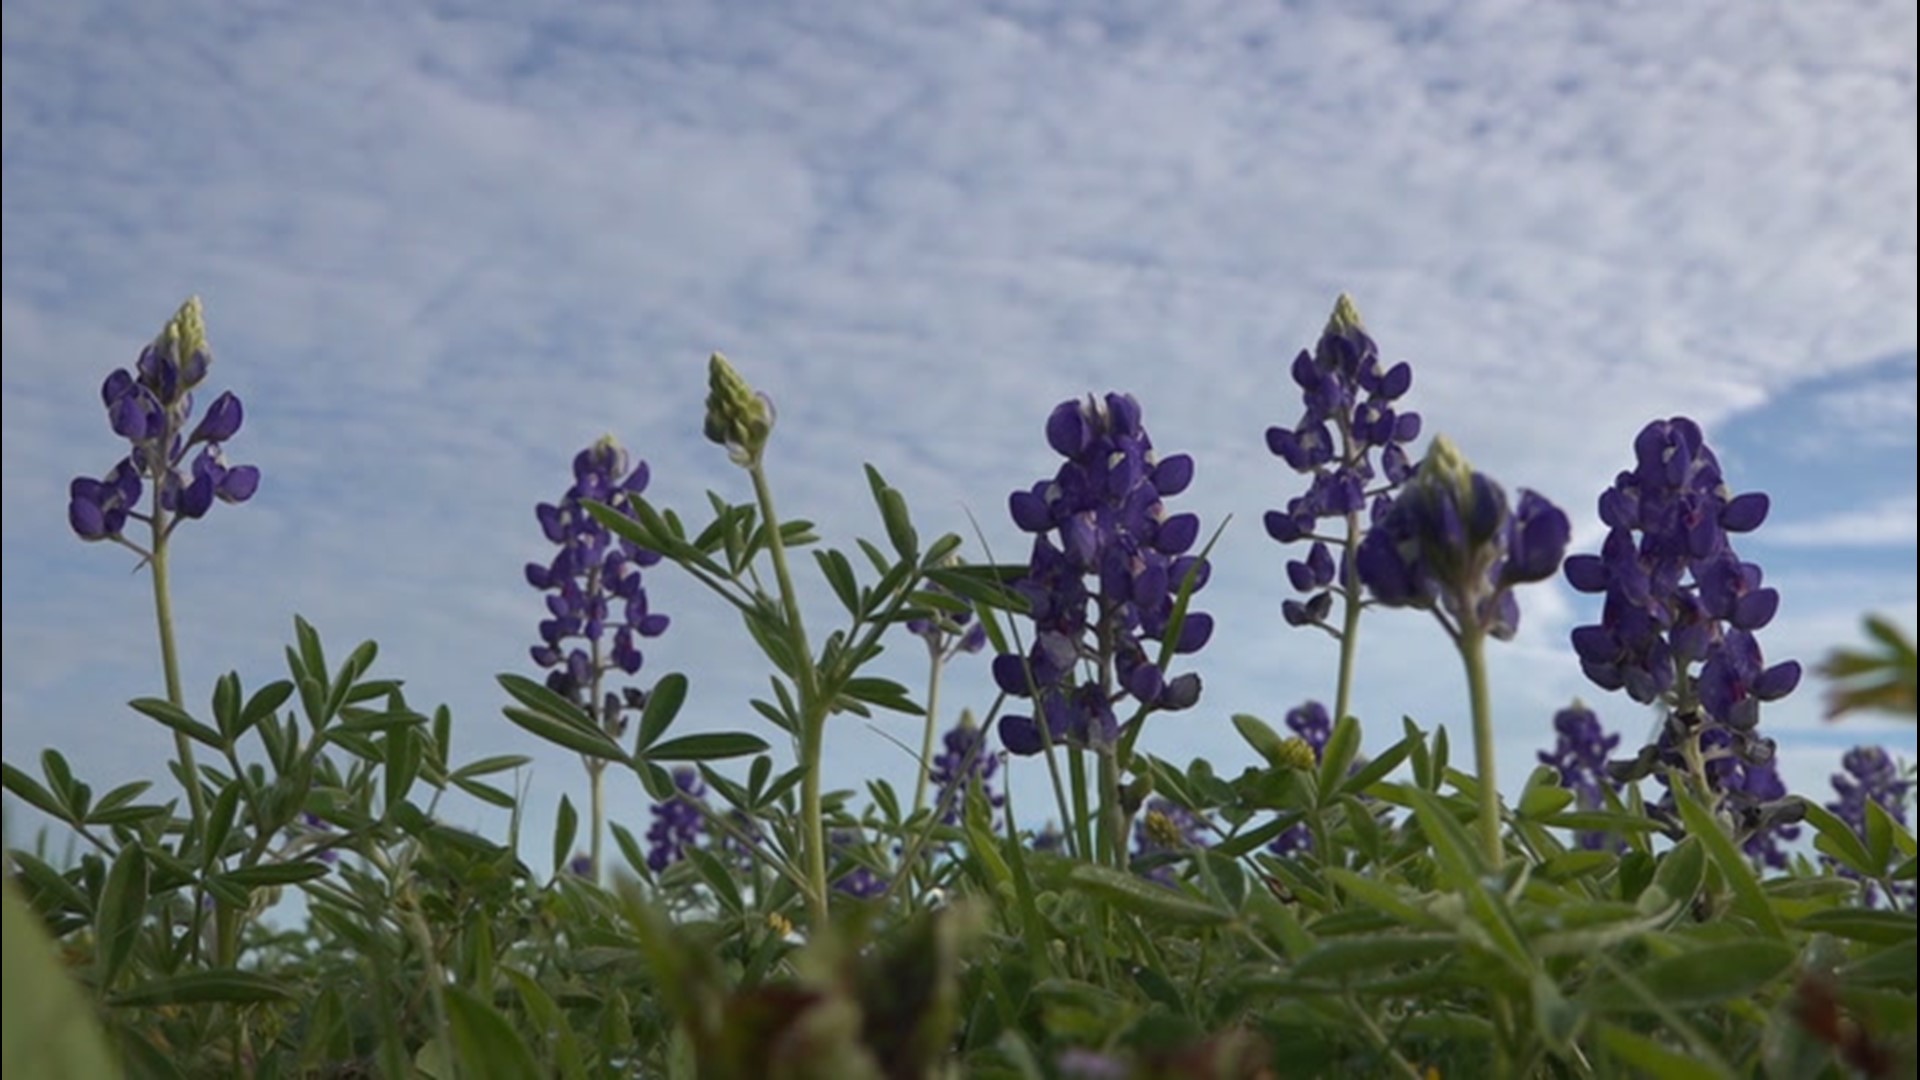 Horticulture experts say mild winter conditions and above-average spring rainfall in parts of Texas have led to an early and colorful wildflower bloom.